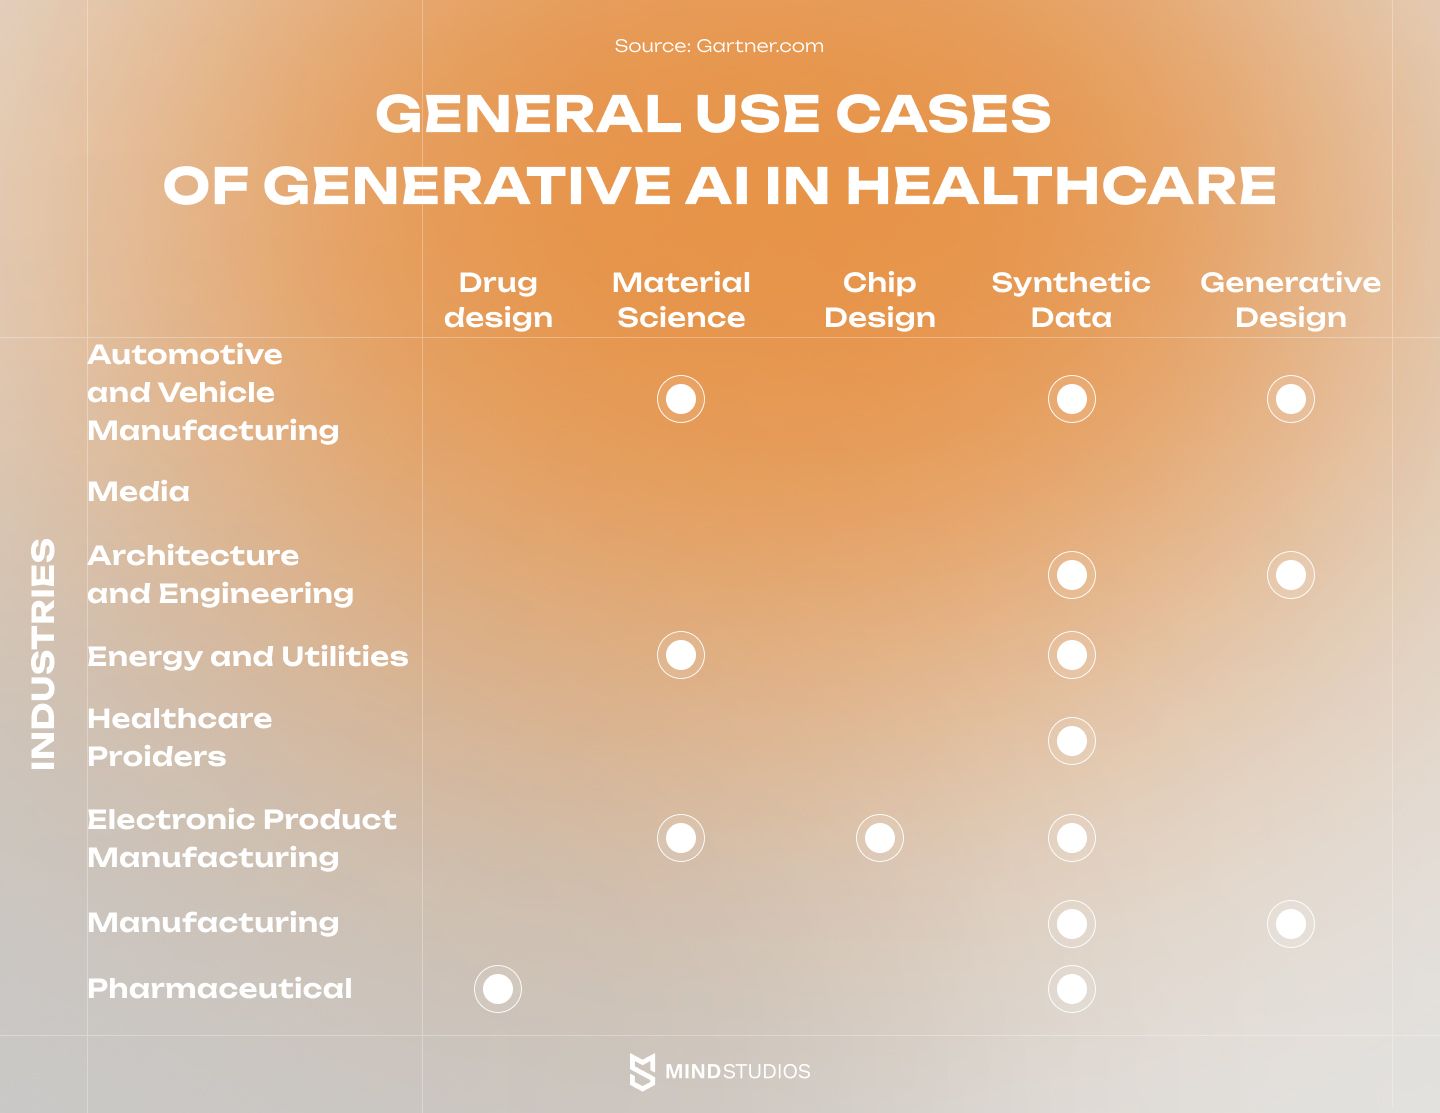 General use cases of generative AI in healthcare